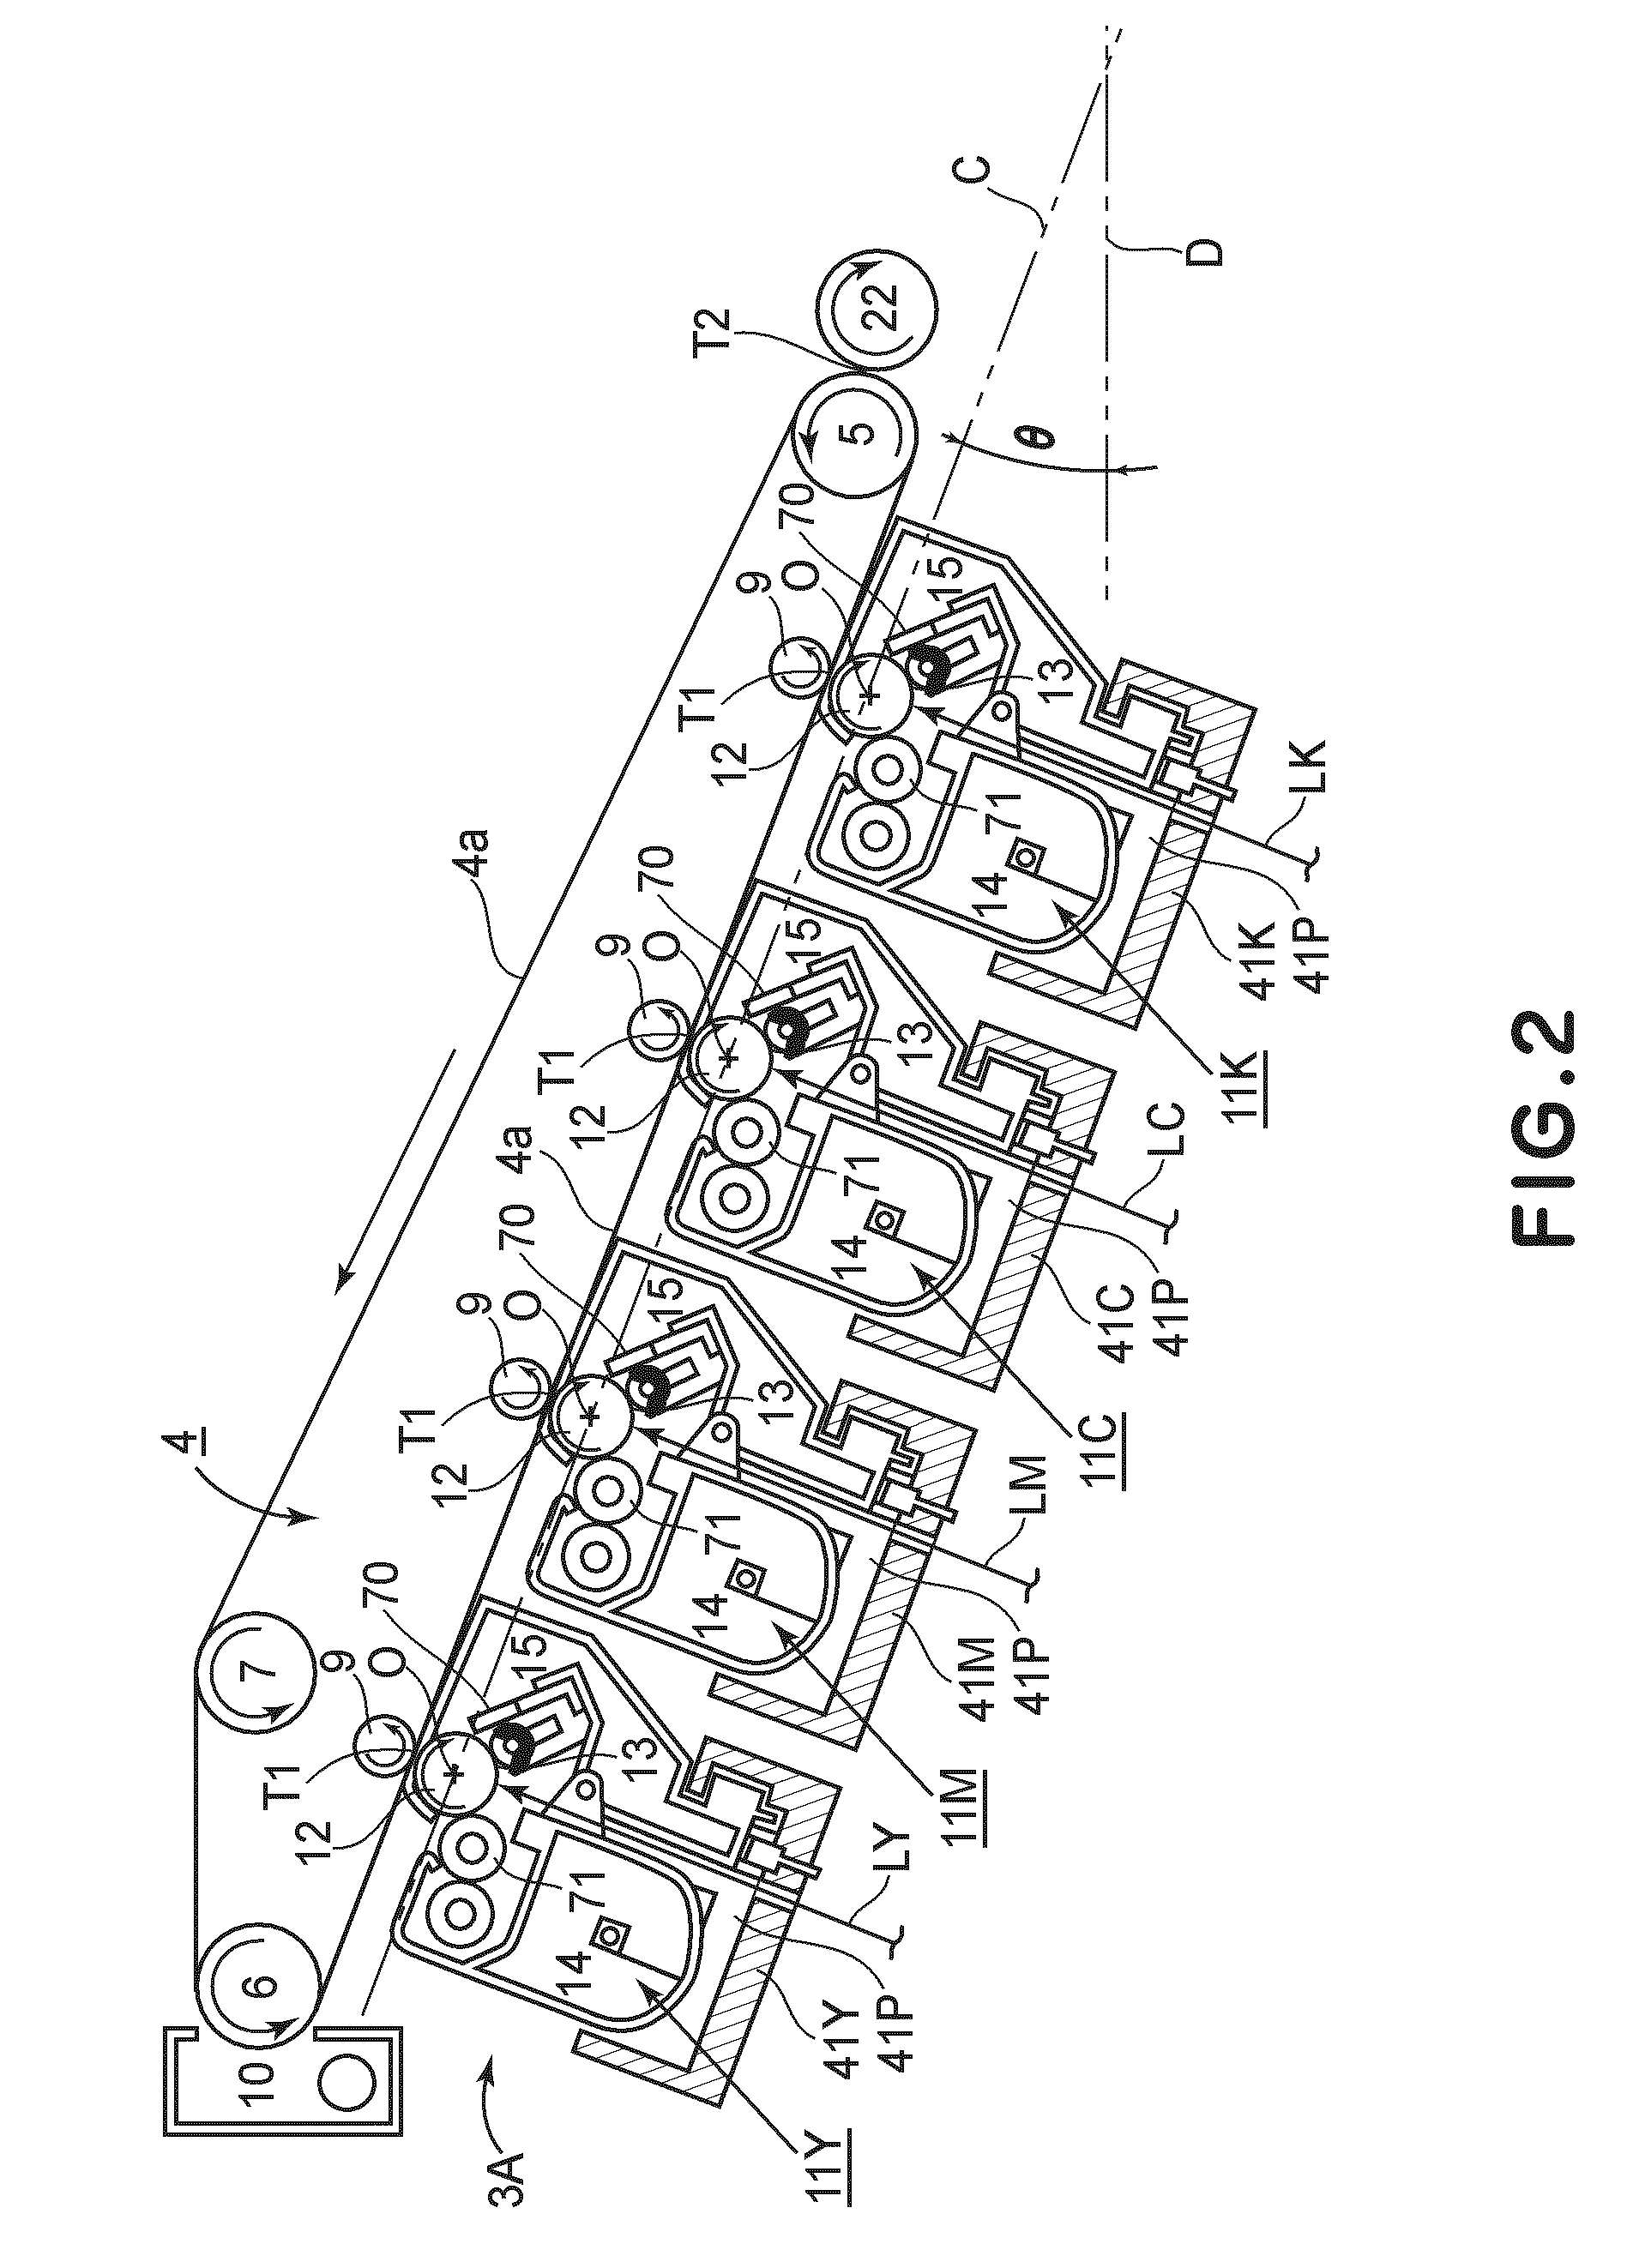 Process cartridge with portions to be supported and regulated during insertion of the cartridge into an electrophotographic image forming apparatus